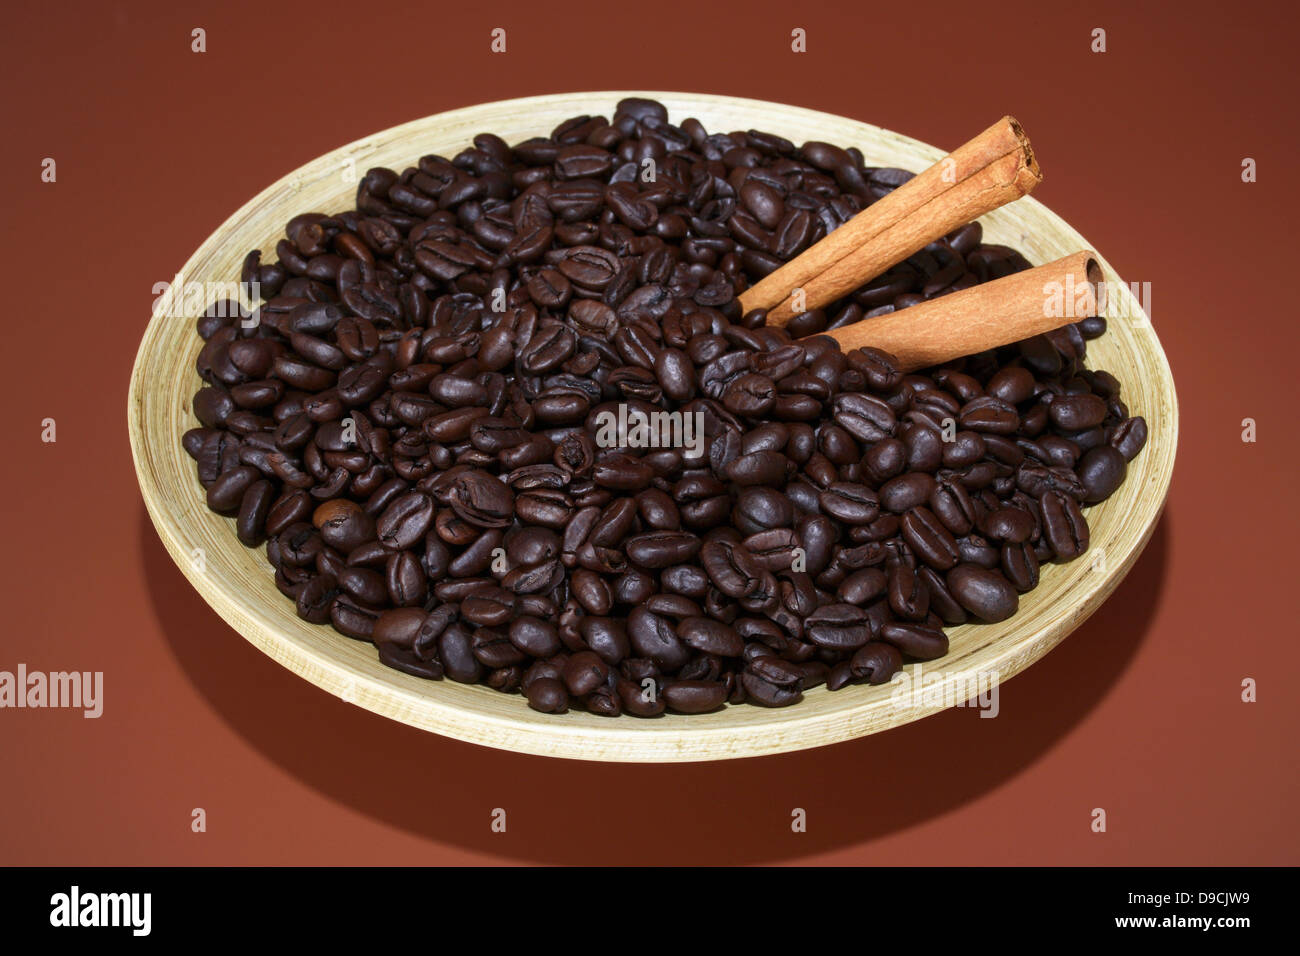 Coffee beans with cinnamon sticks in a bowl Stock Photo